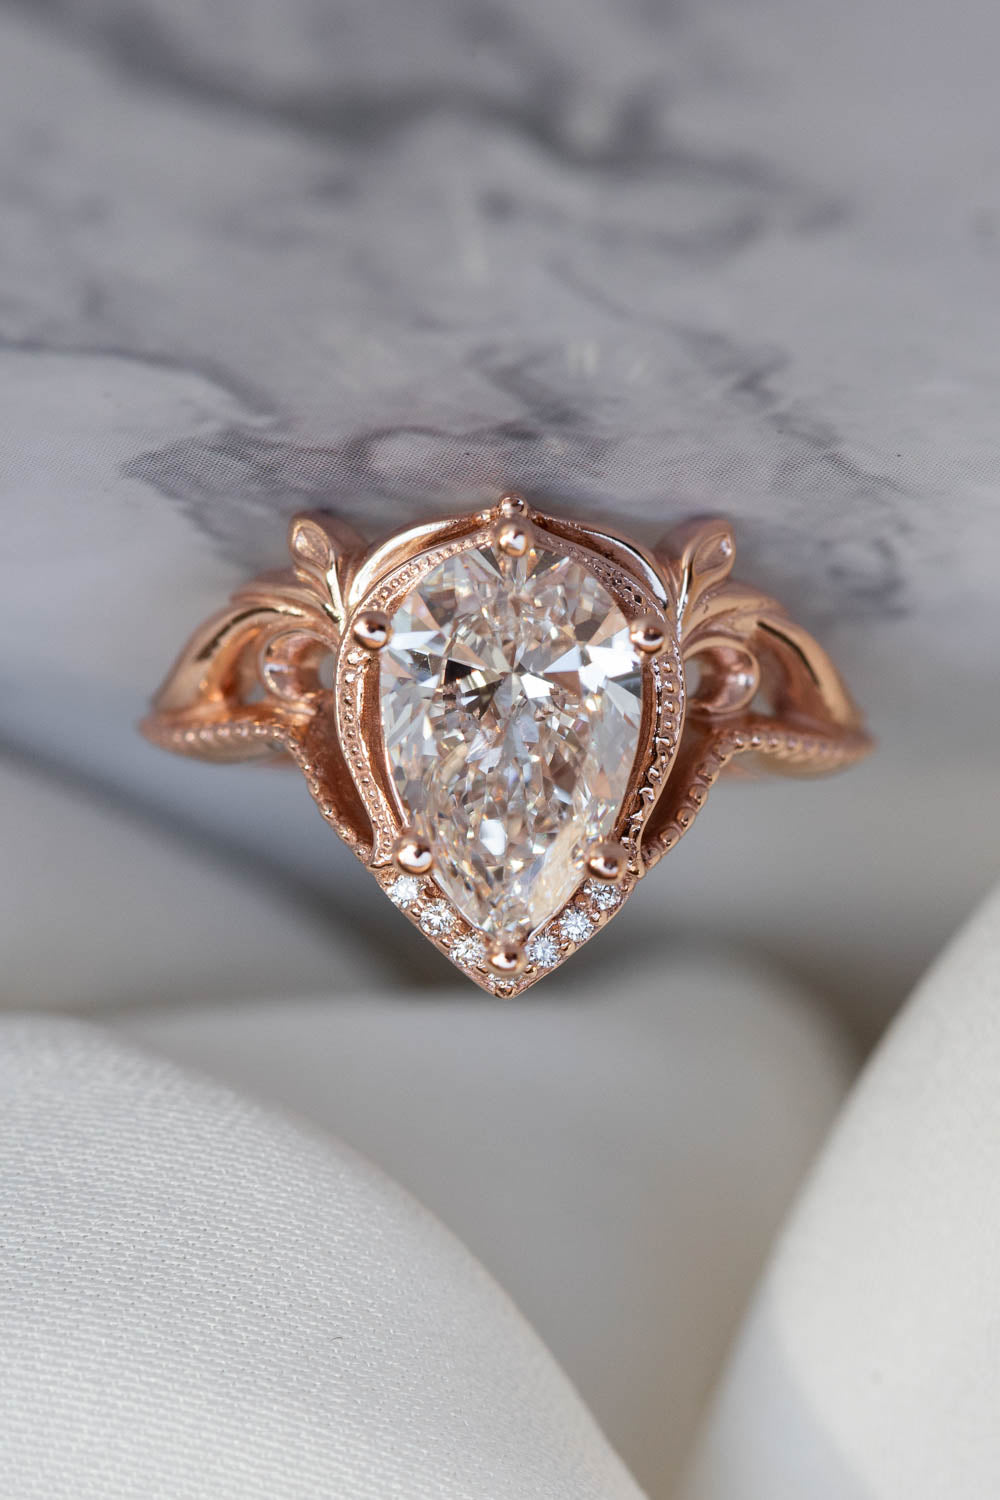 2Ct Pear Lab Diamond Ring Stack Rose Gold Solitaire Ring Bridal Set